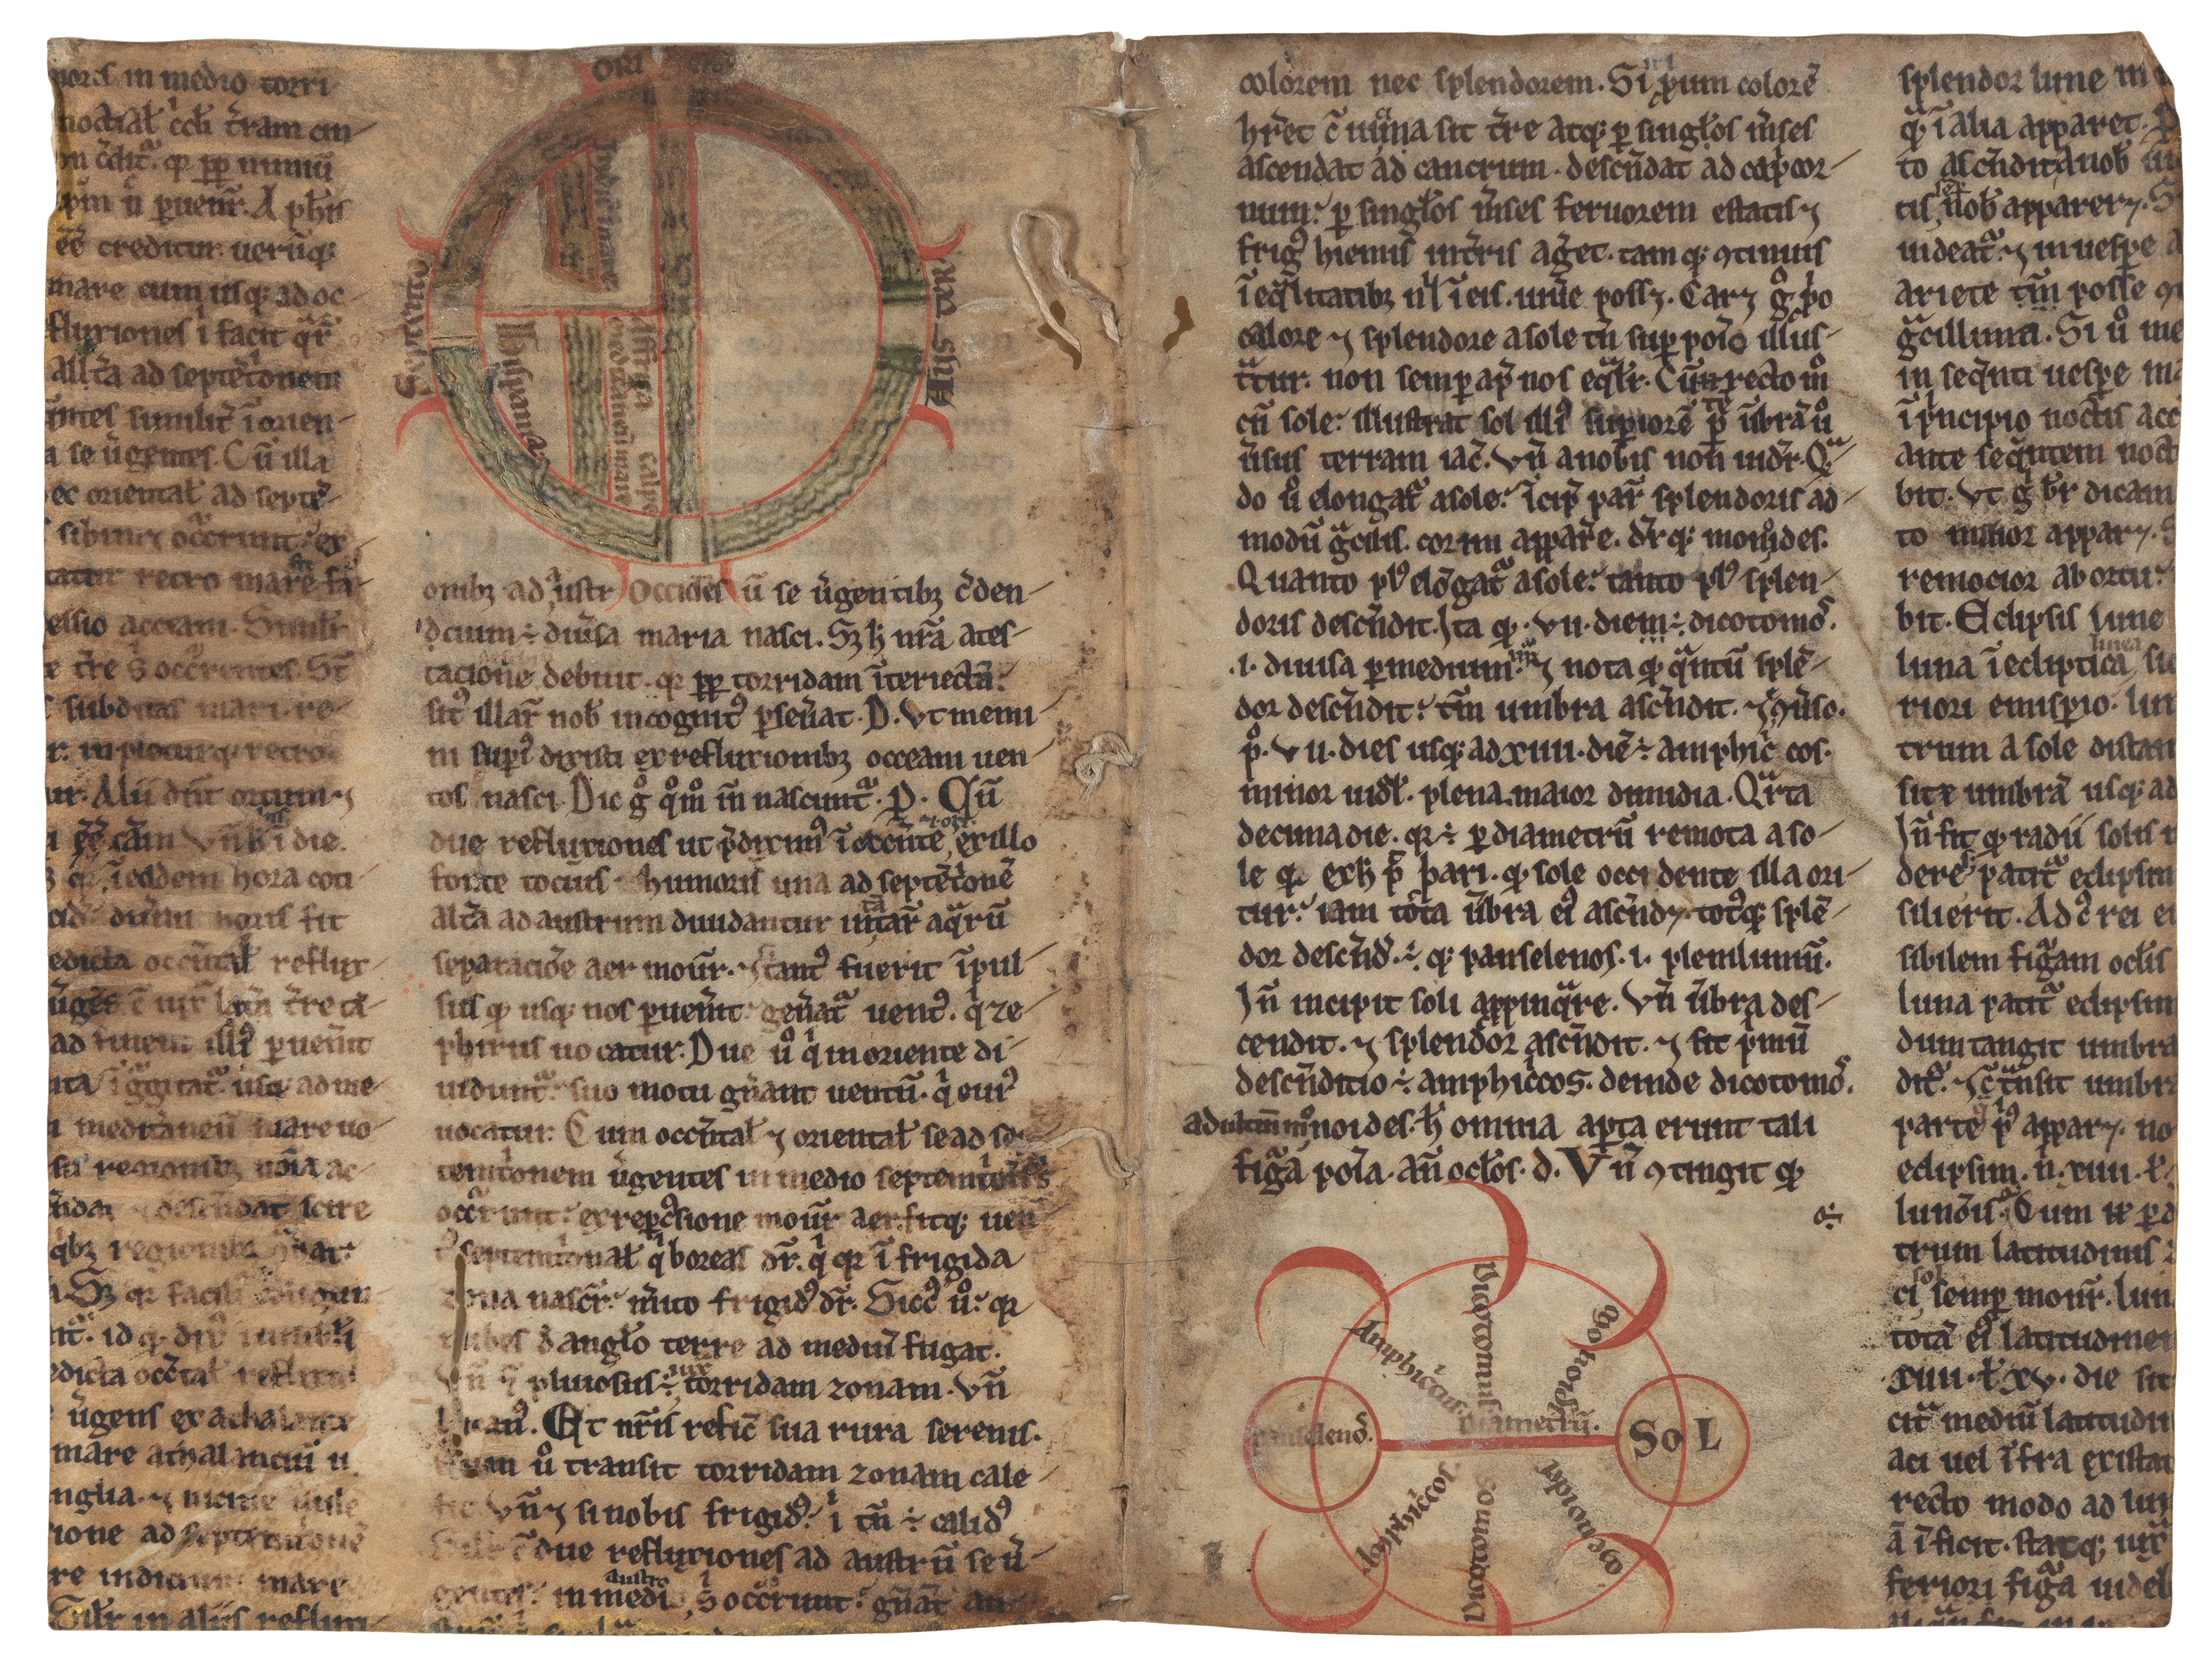 Manuscript page containing two maps: a T-O world map and a diagram of lunar eclipses. The world map is lightly colored and the lunar diargam is red. The page is hand-written and was taken from William de Conches.